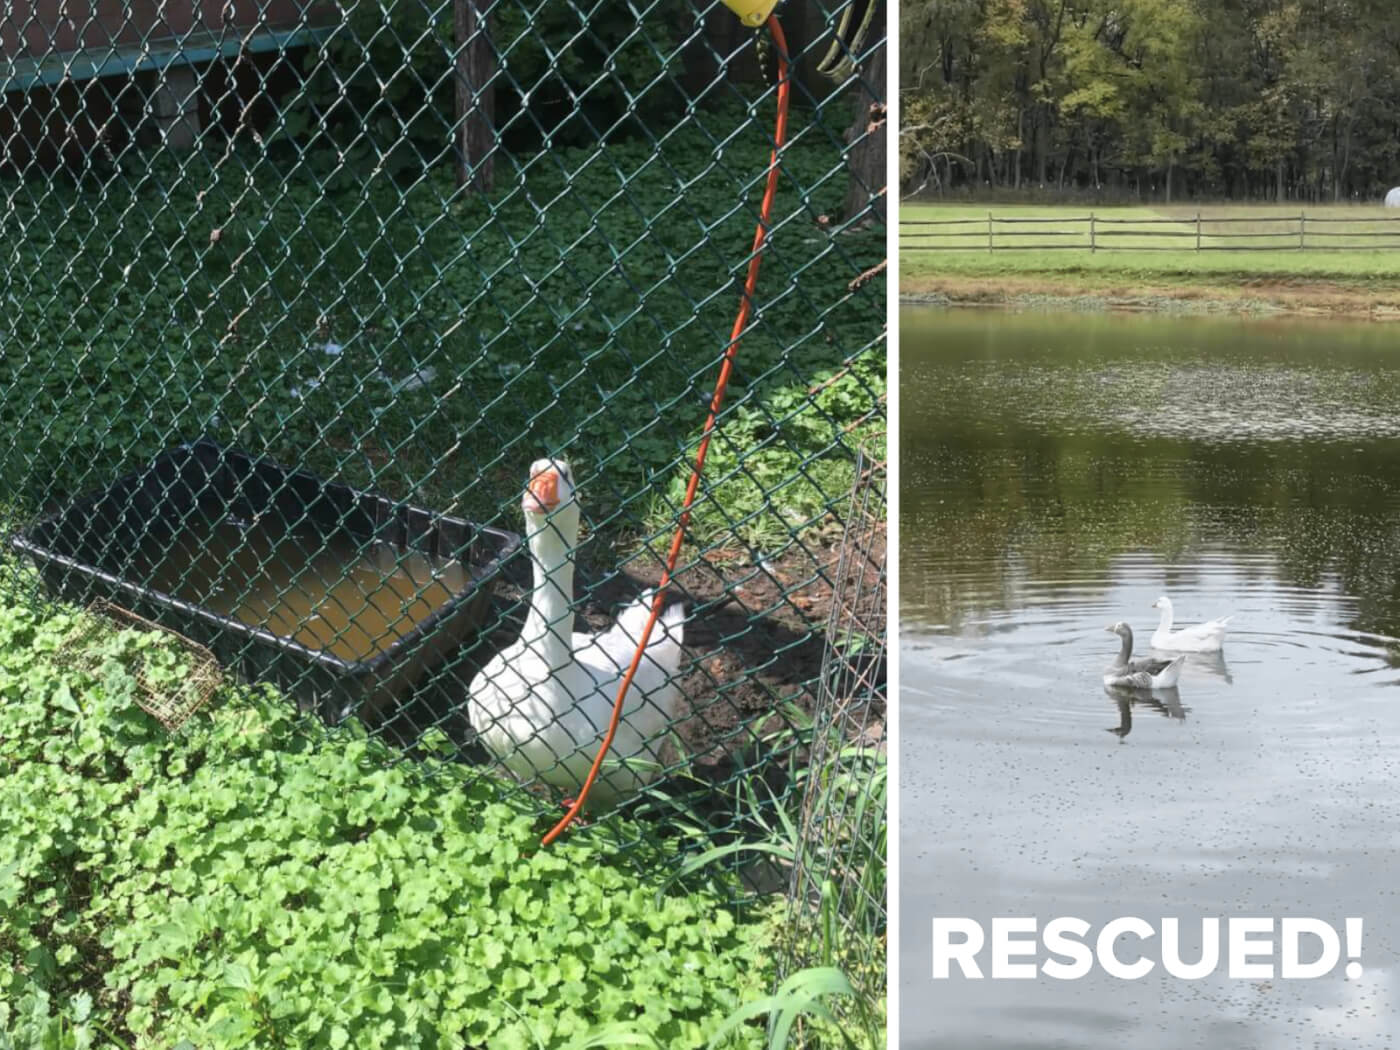 a photo collage showing geese next to filthy drinking water in a fenced enclosure at tri-state zoo, next to a photo of them swimming on a pond in freedom living in sanctuary.